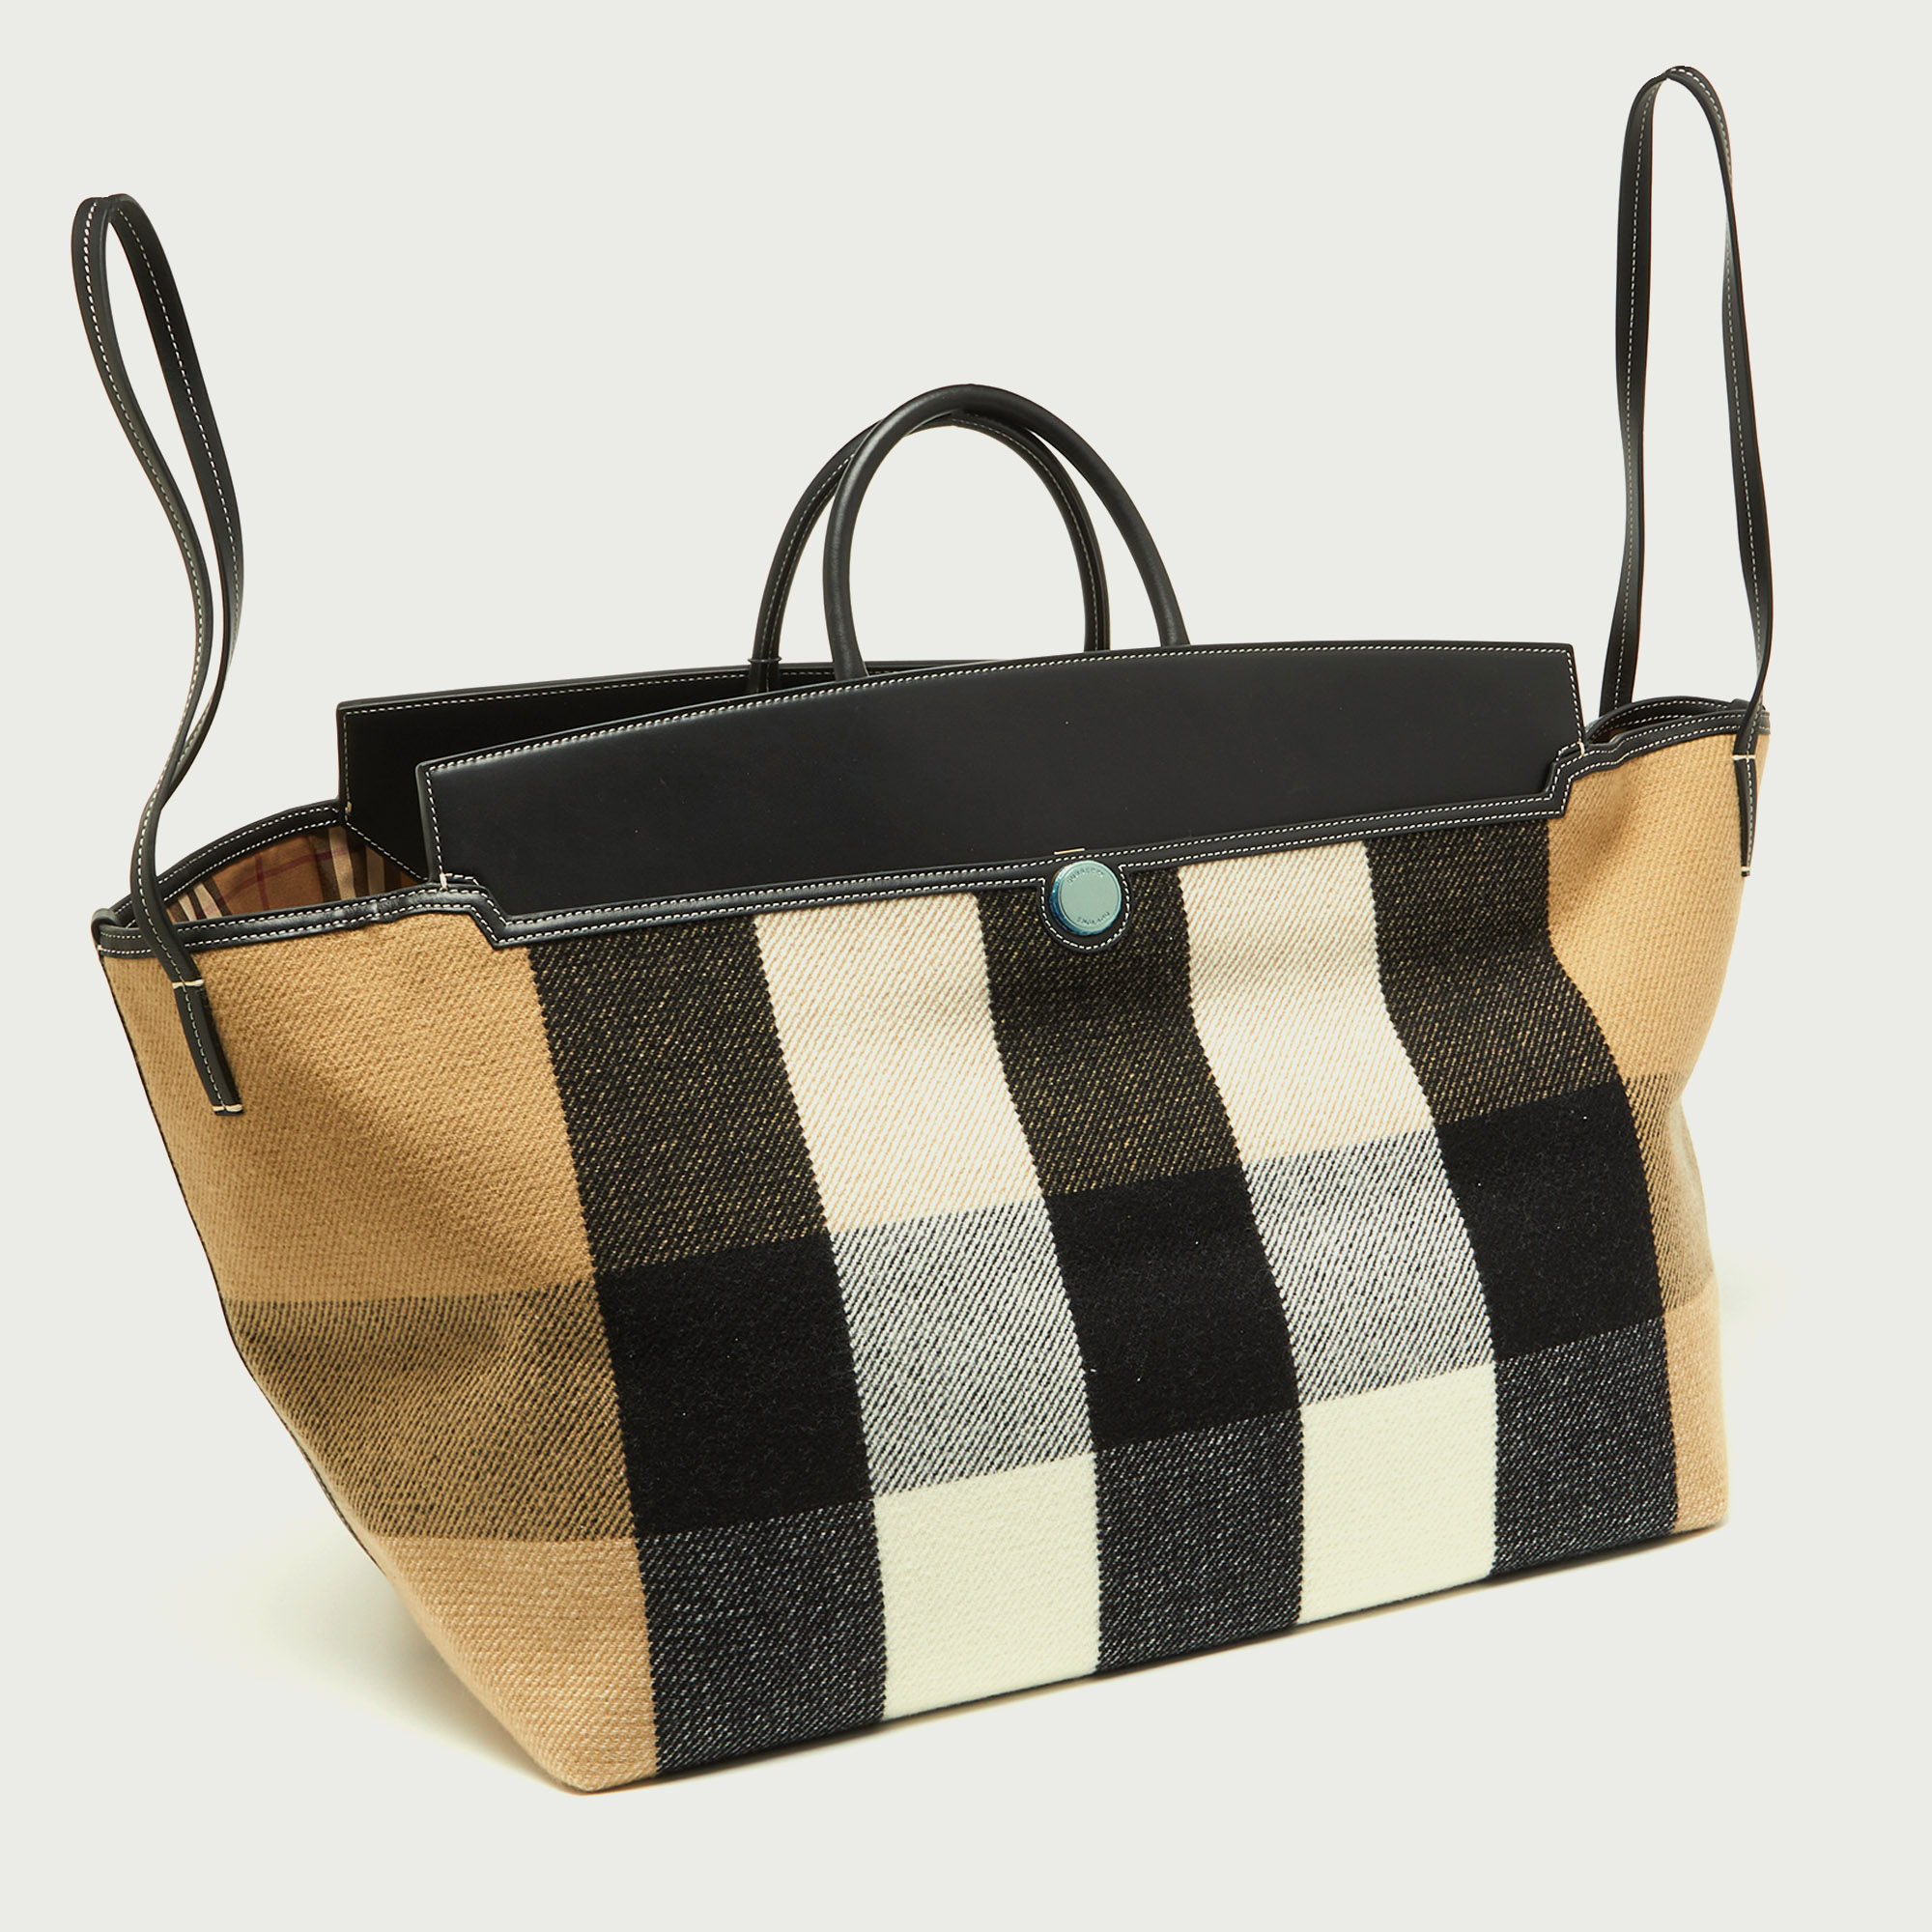 Burberry Black/Beige Check Wool And Leather XL Society Holdall Tote